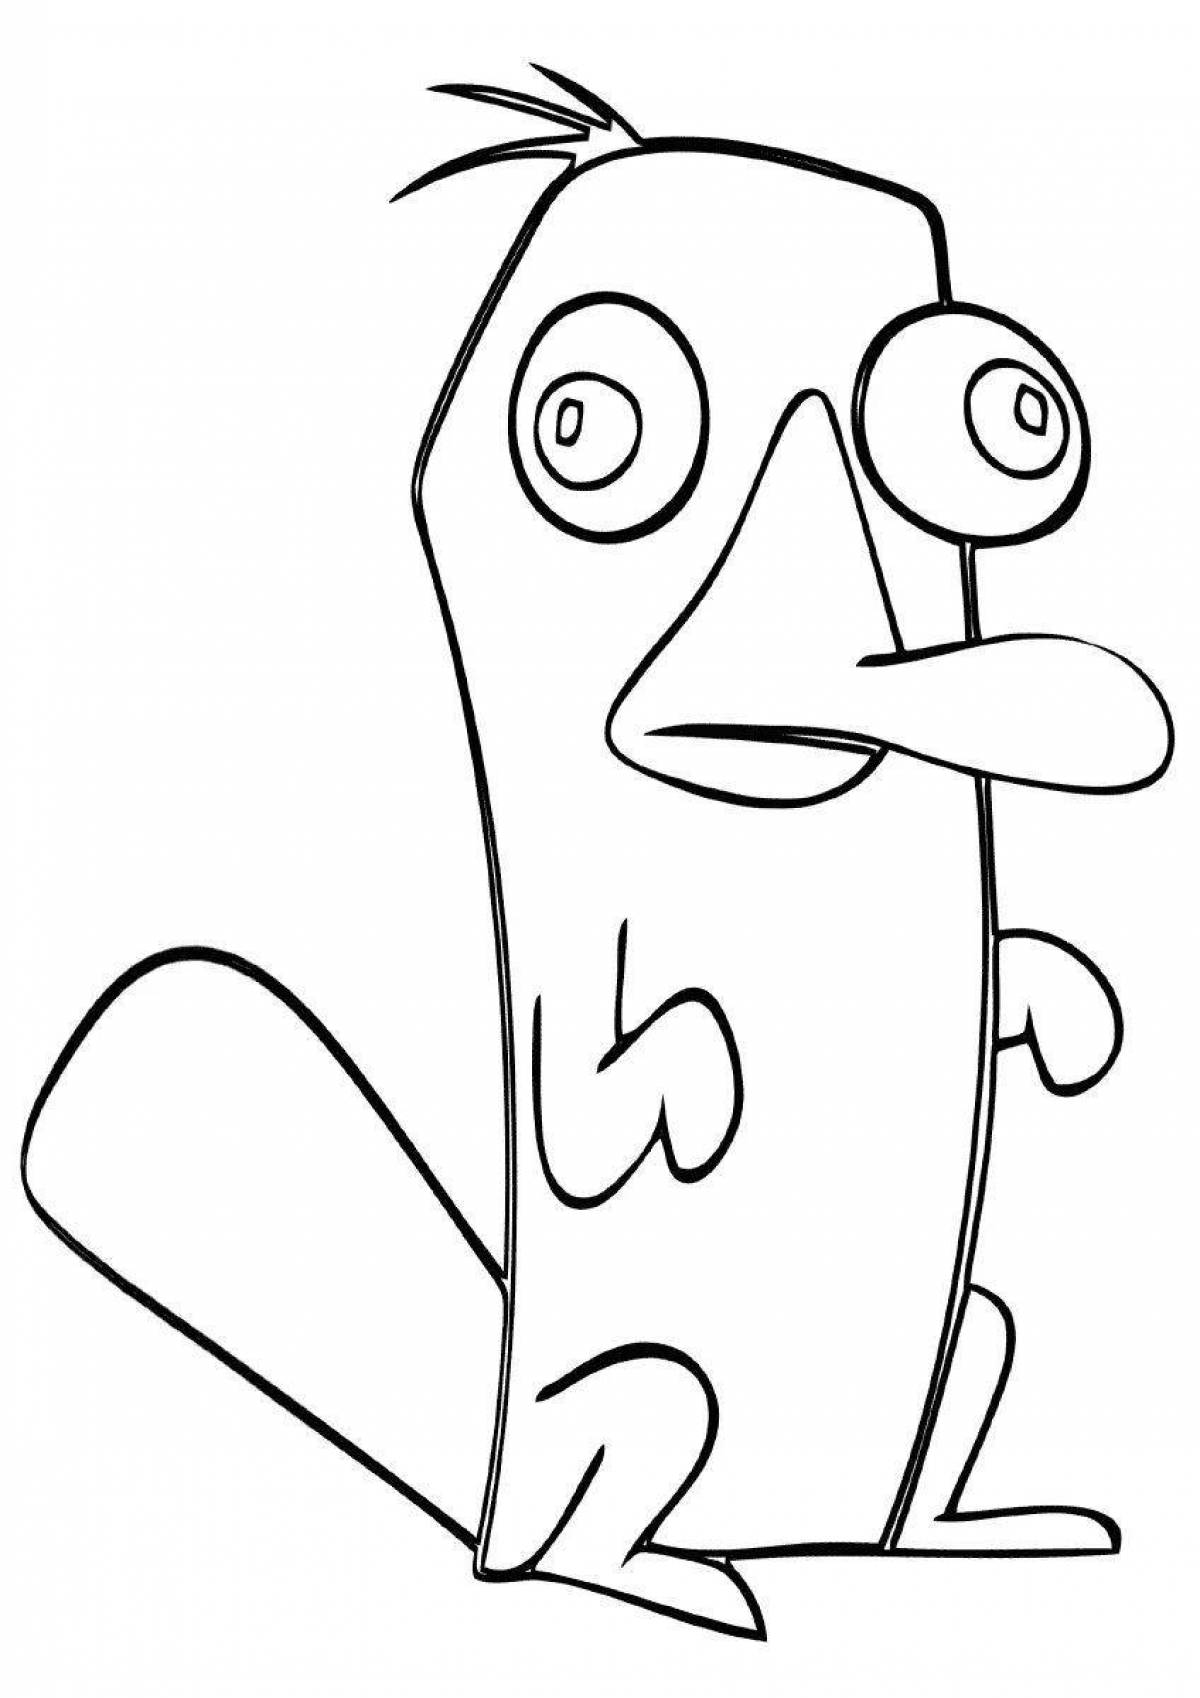 Exciting perry platypus coloring page